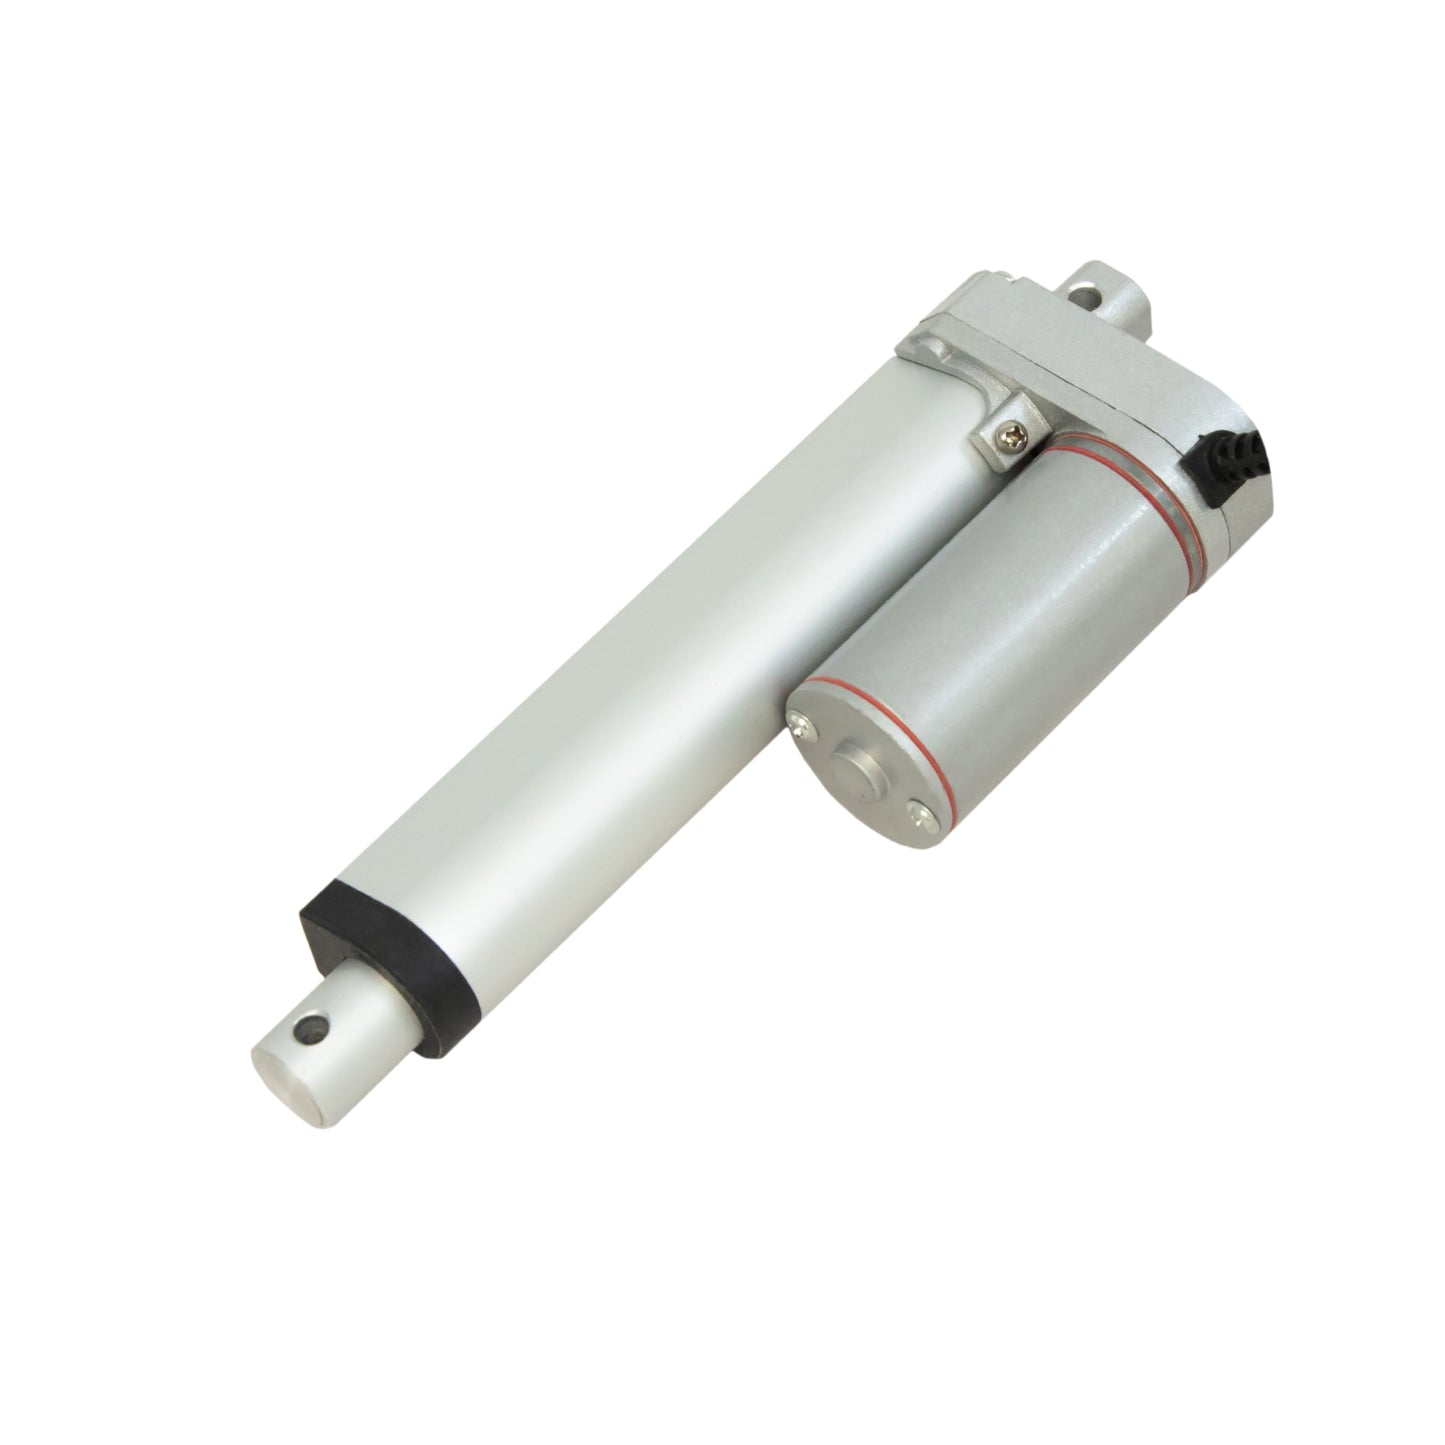 24 inch linear actuator